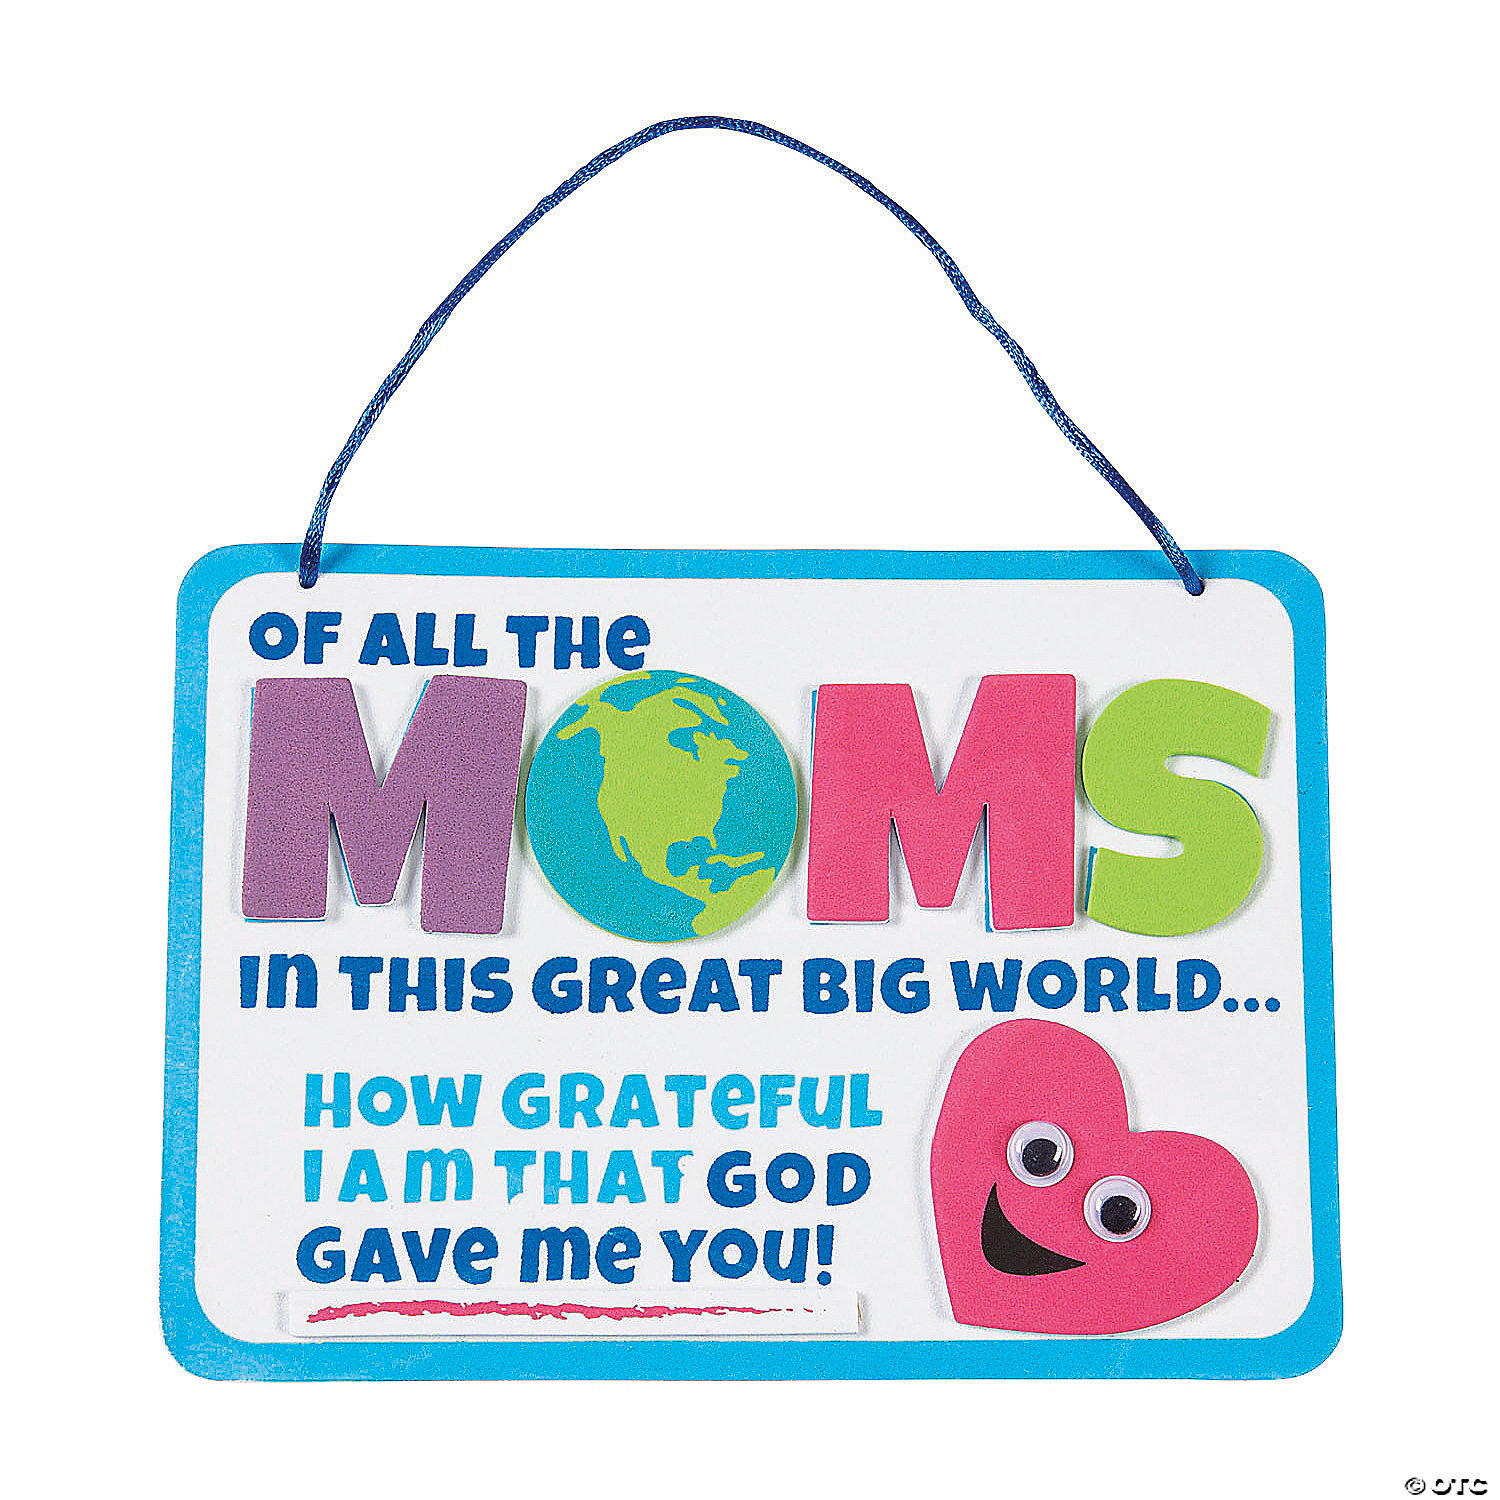 oriental trading mothers day crafts